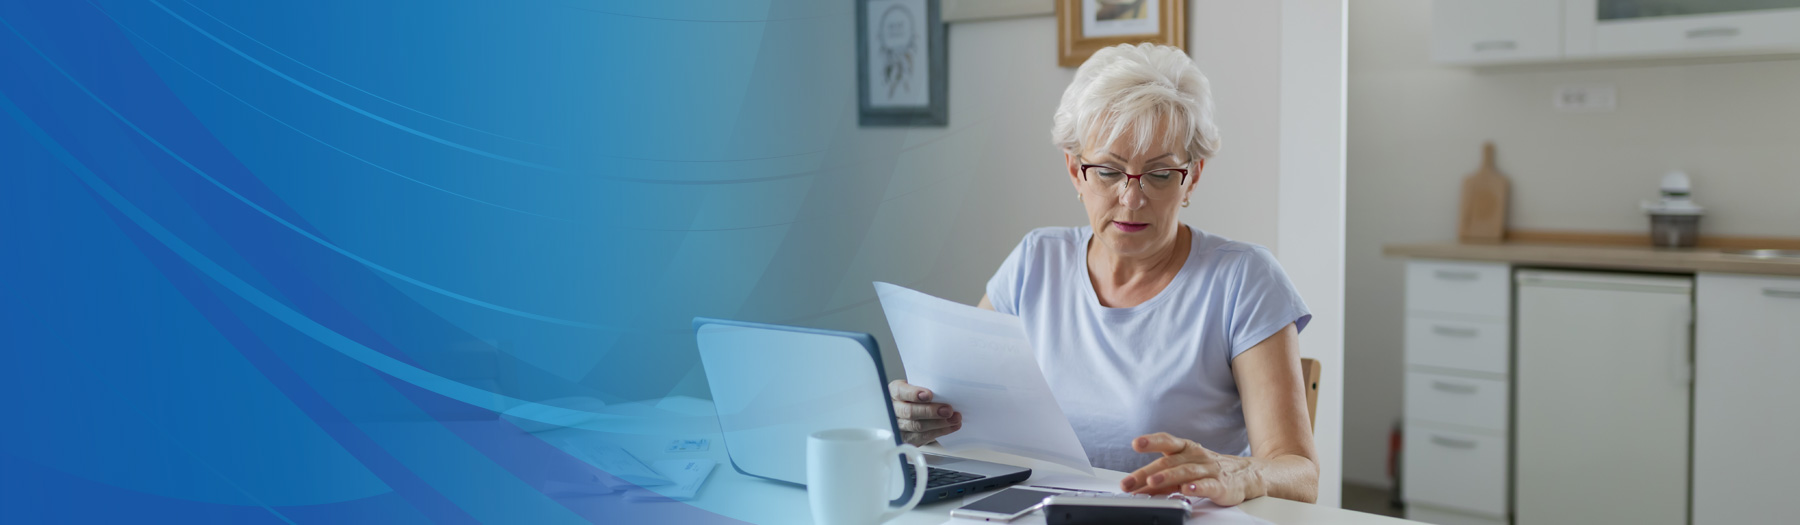 Older woman sitting at home examining papers